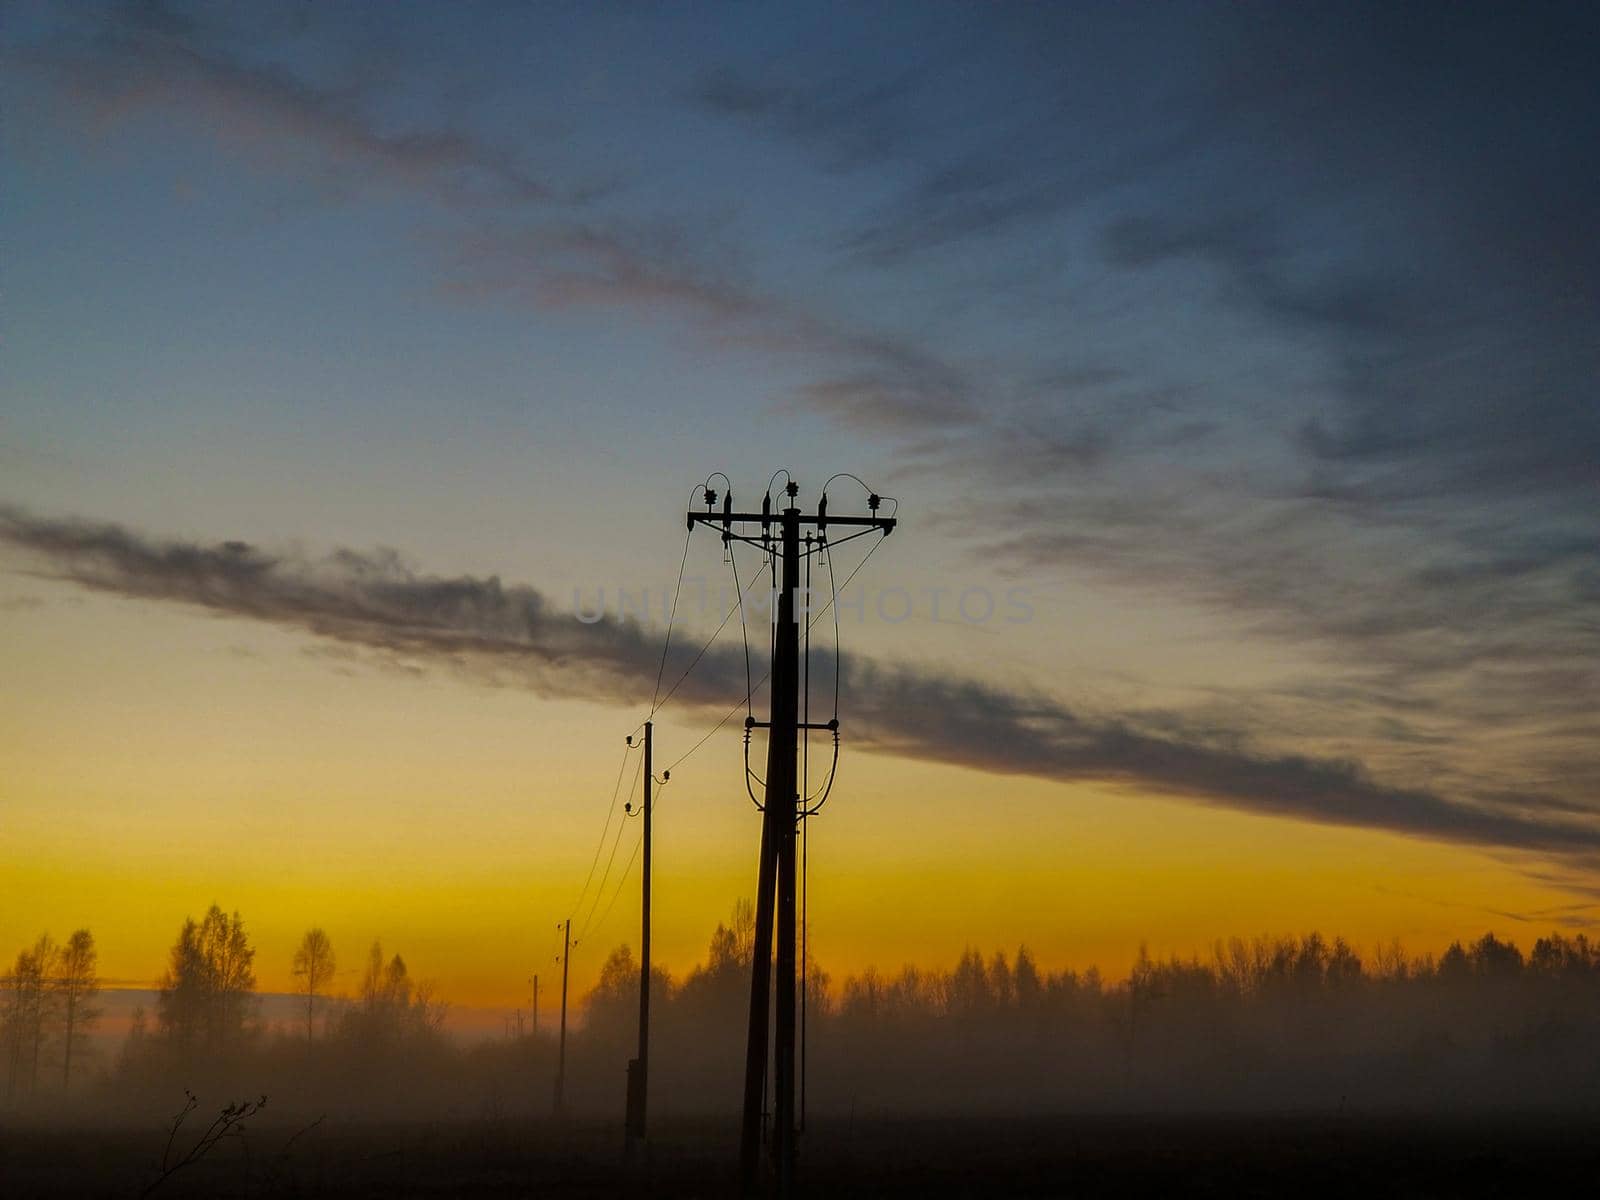 high voltage carrier power line in the fog against the background of a cloudy sky during sunset by zakob337